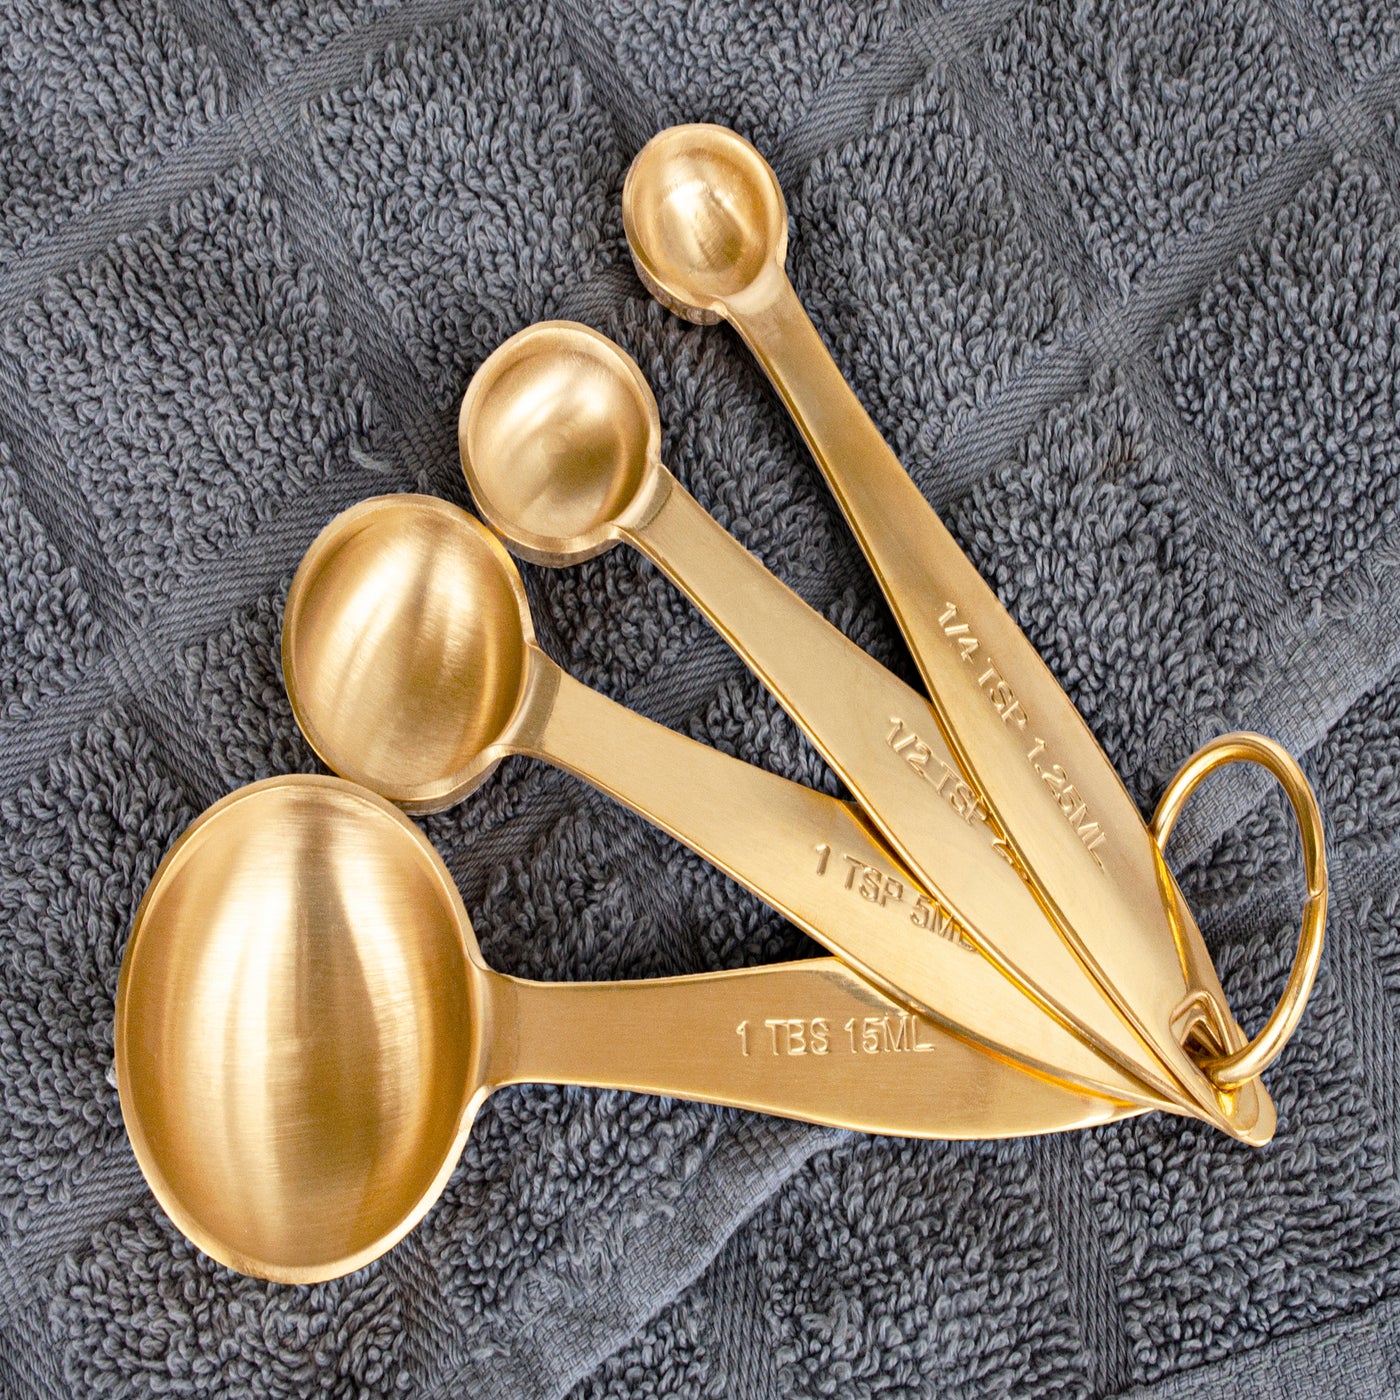 Stainless Steel Measuring Spoons in Gold, Set of 4 – C by M Creative